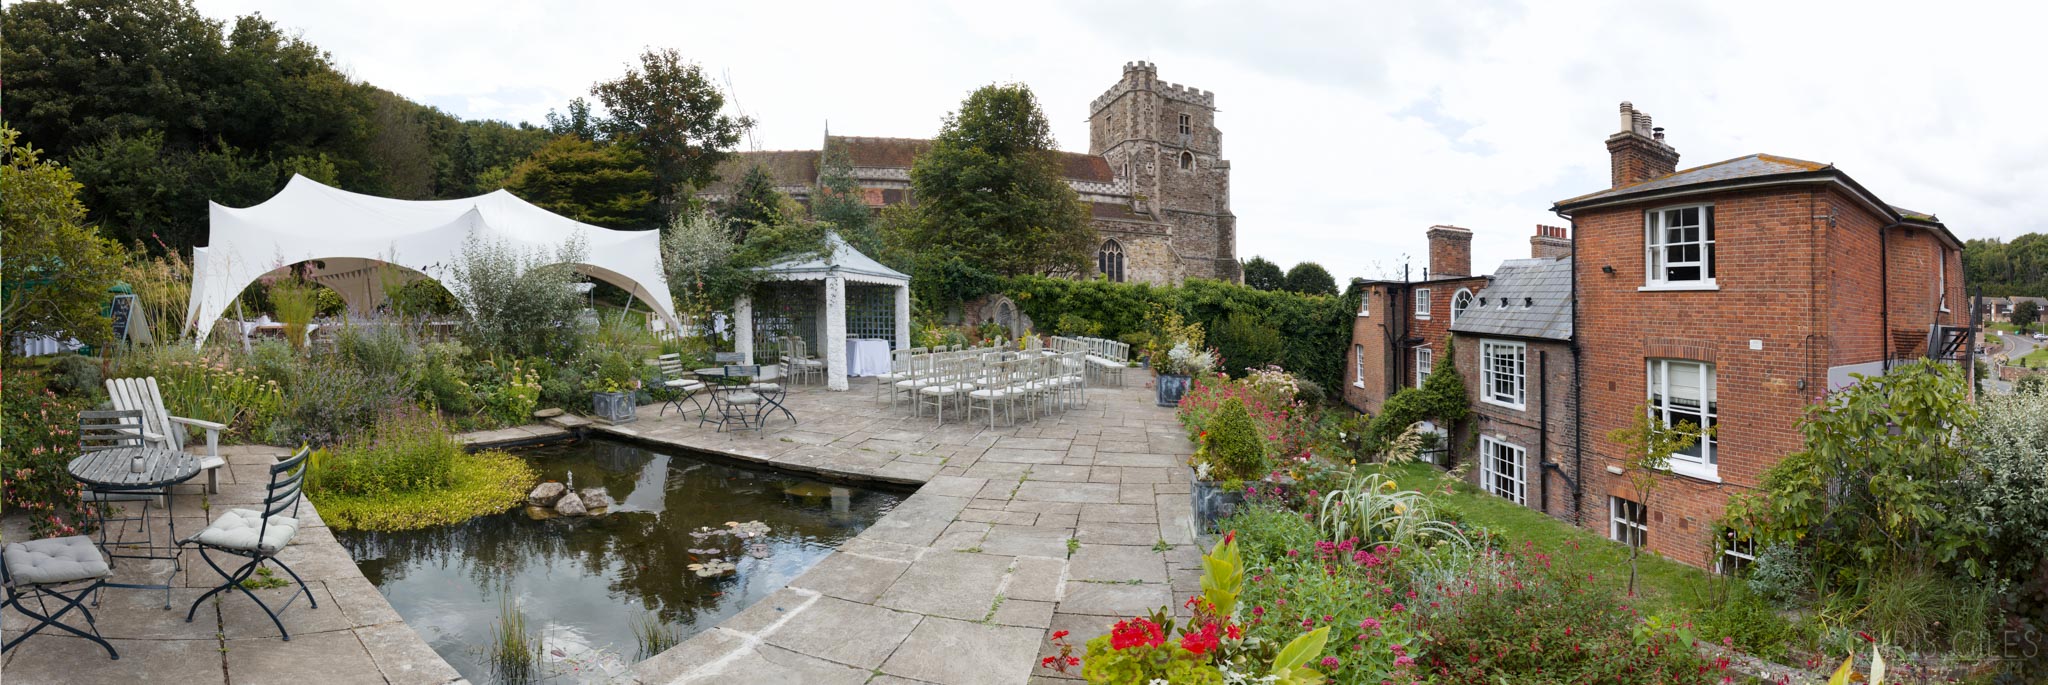 Panorama of the garden area at The Old Rectory Hastings